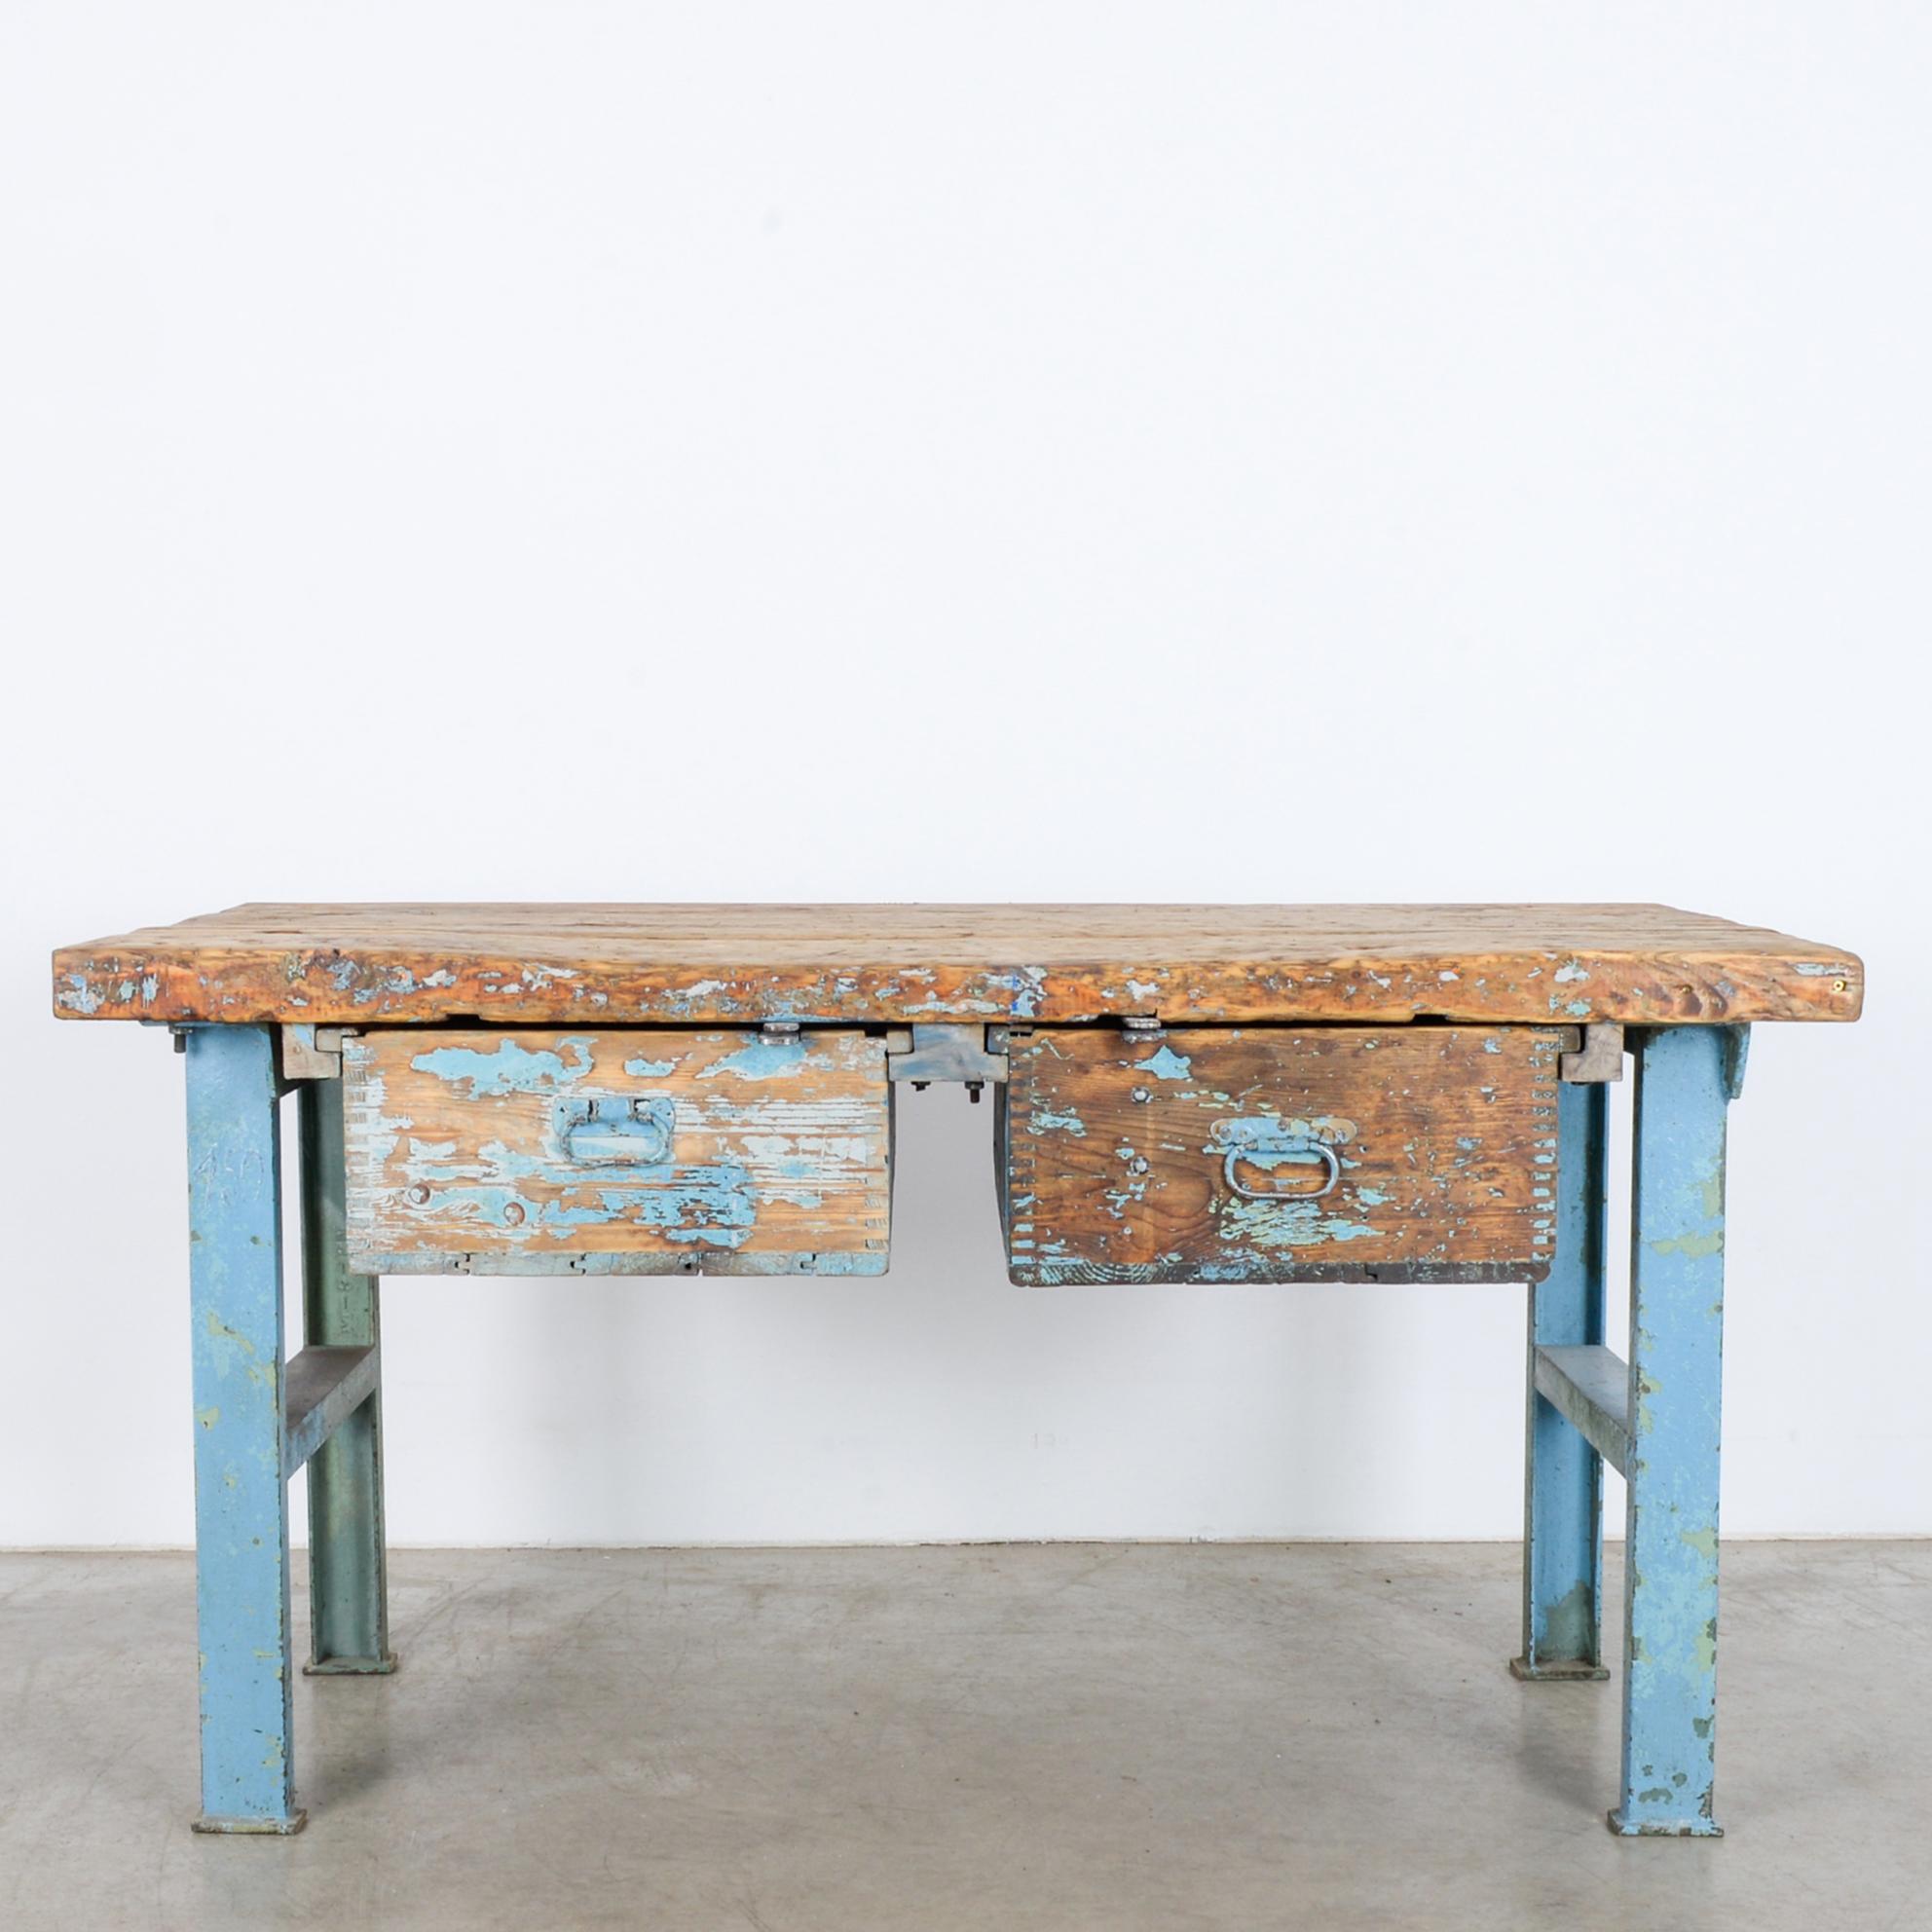 This worktable with two drawers was made in Central Europe, circa 1940. With sturdy, metal legs and a hand-hewn tabletop consisting of three hefty wooden planks, the table will lend a distinctive industrial vibe into any space. The distressed patina